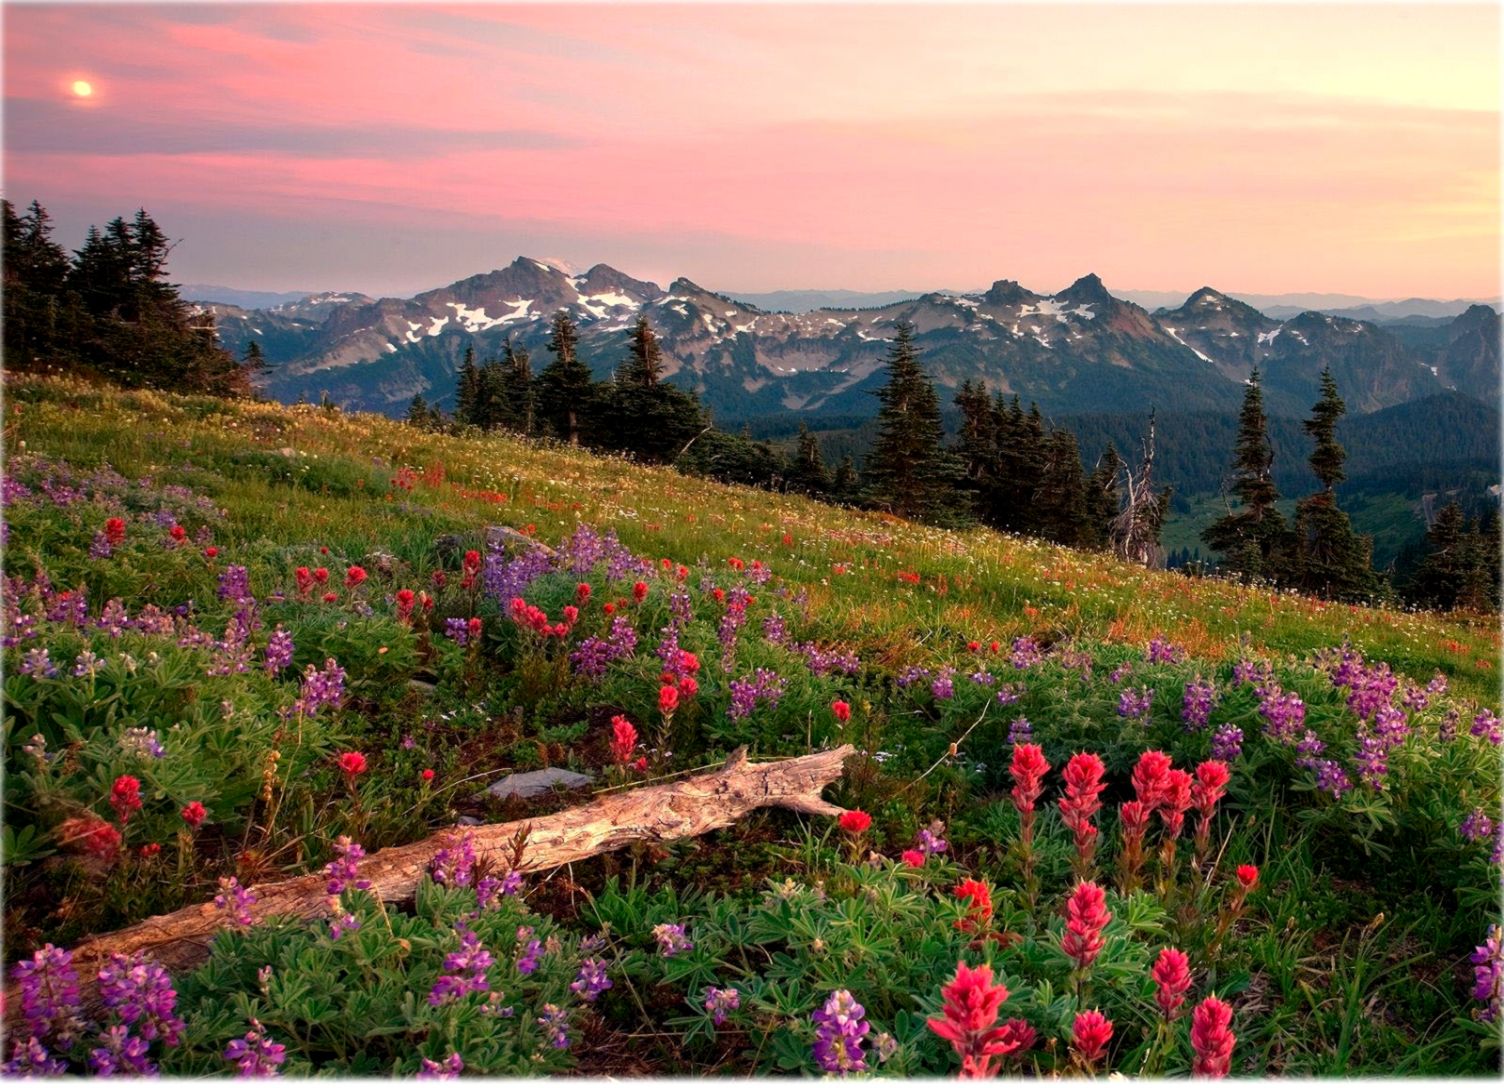 Scenery & Spring Pictures Scenery Pictures Slideshow - Mount Rainier - HD Wallpaper 